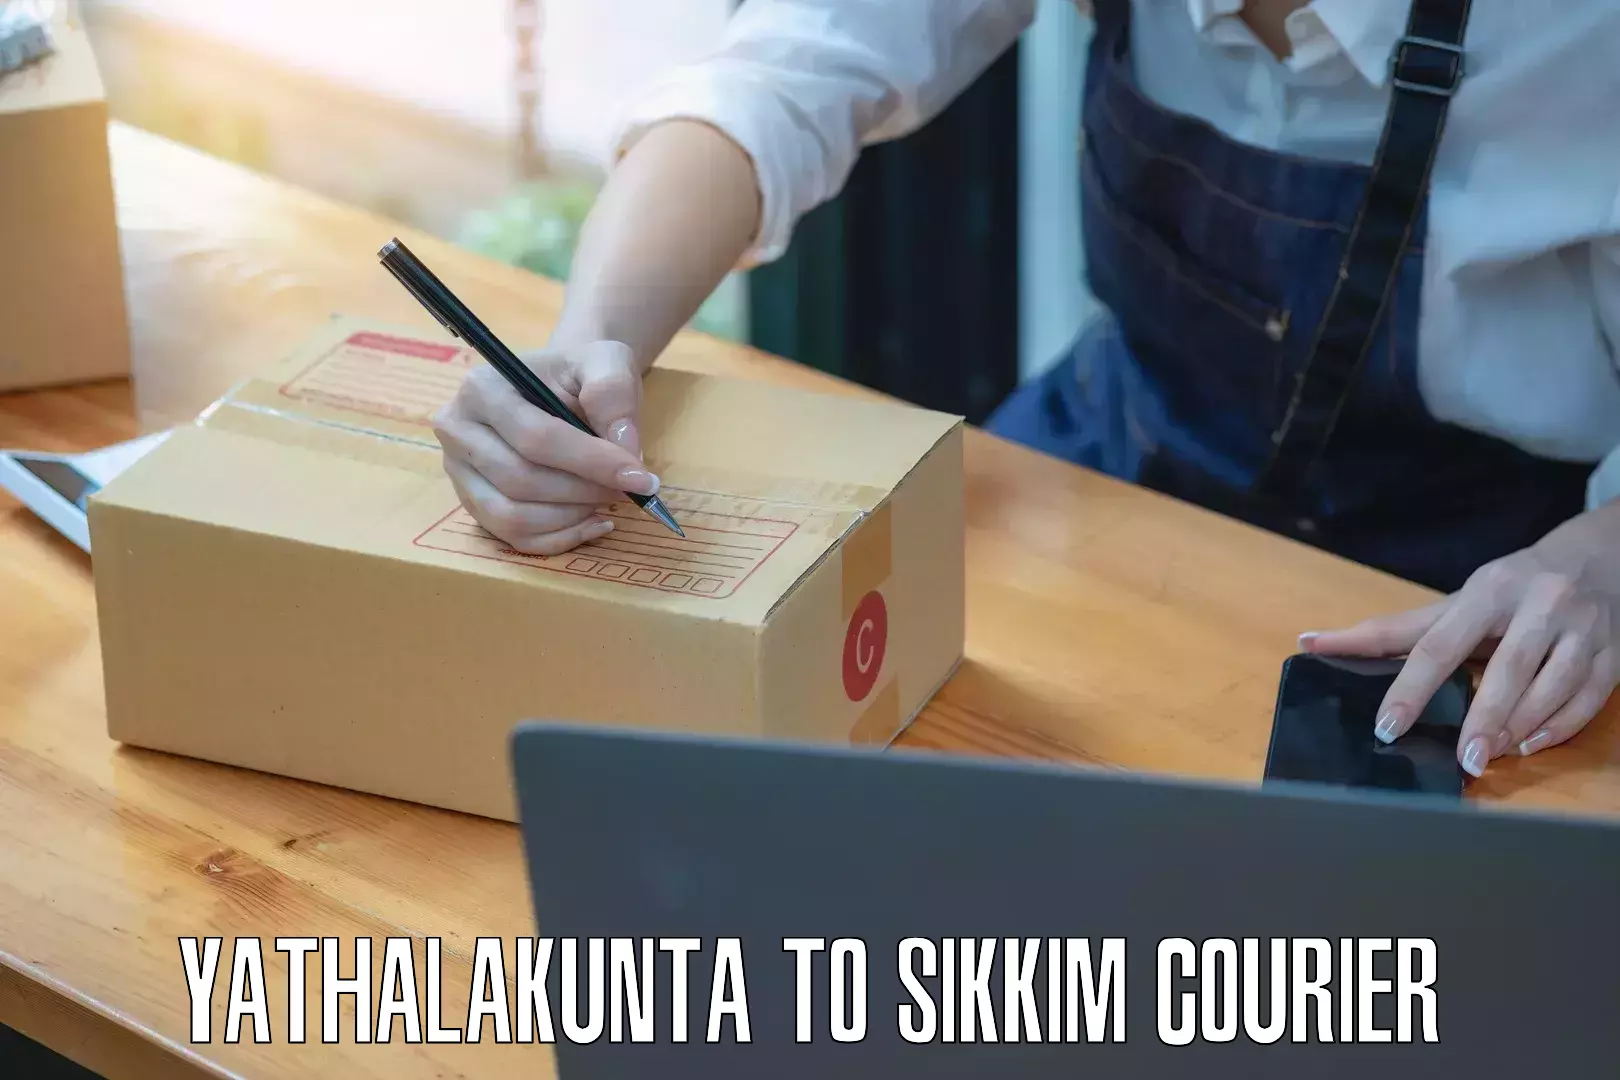 Full-service courier options Yathalakunta to Singtam